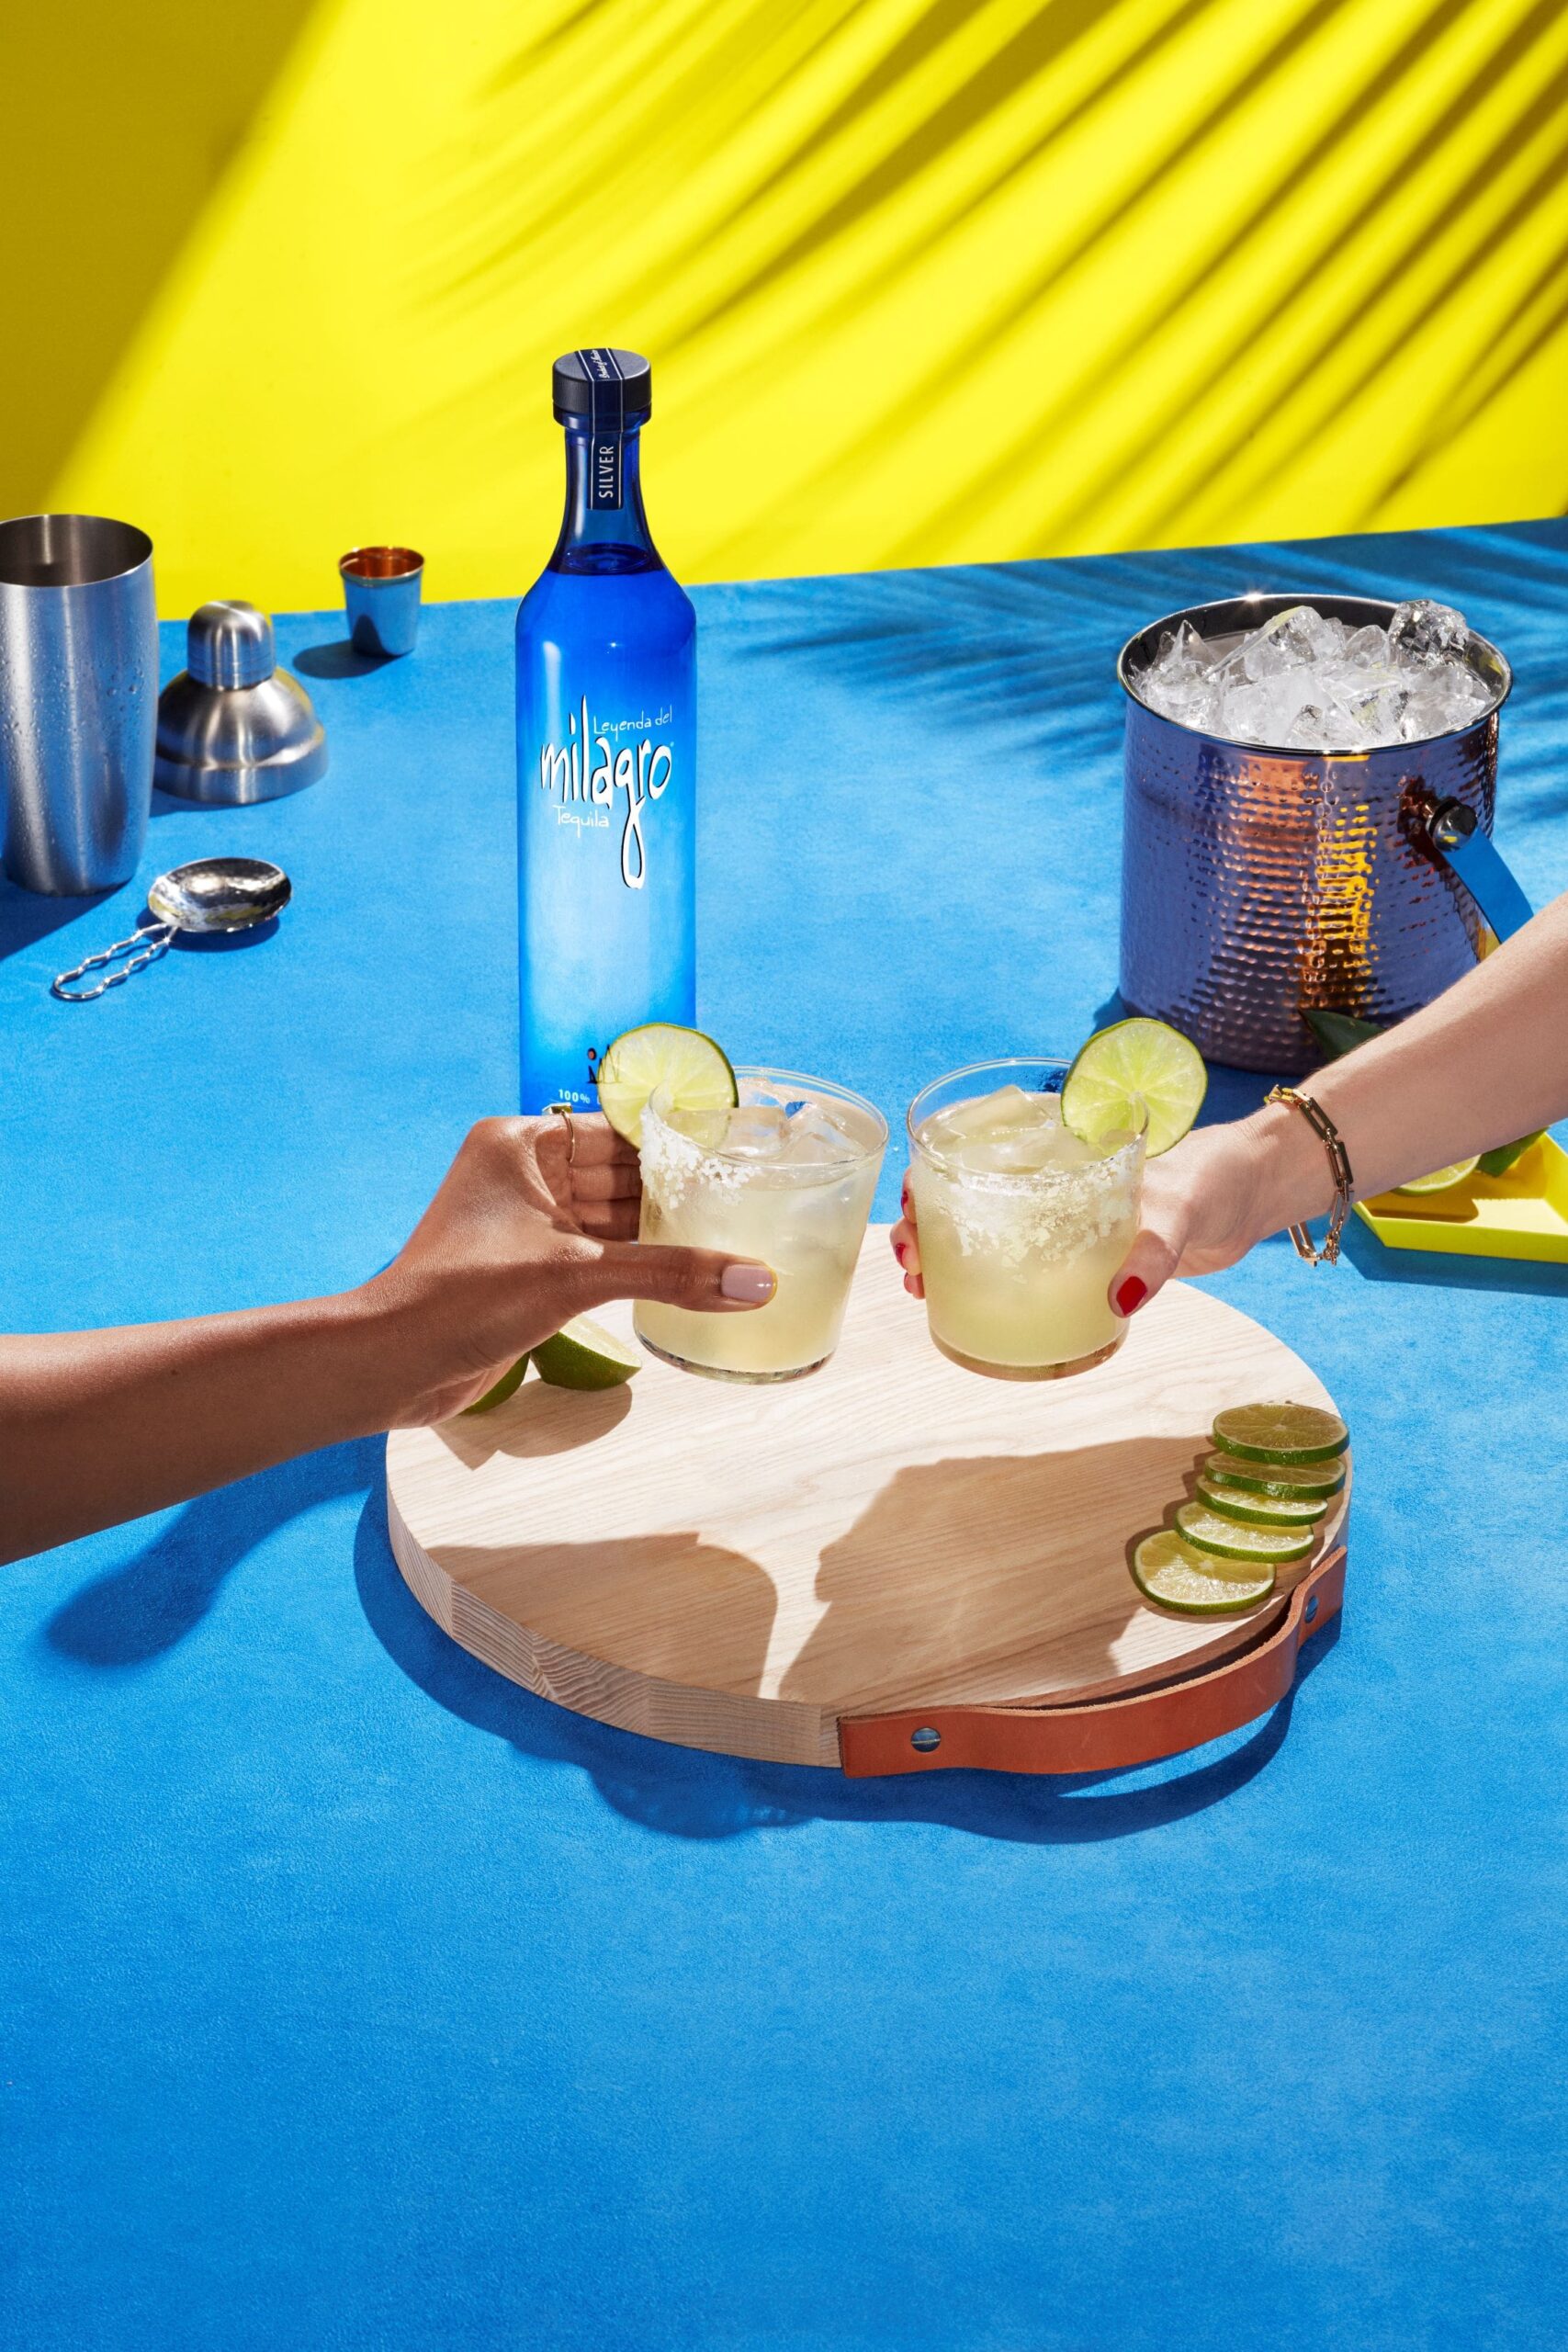 An image of a bottle of Milagro tequila and two margaritas